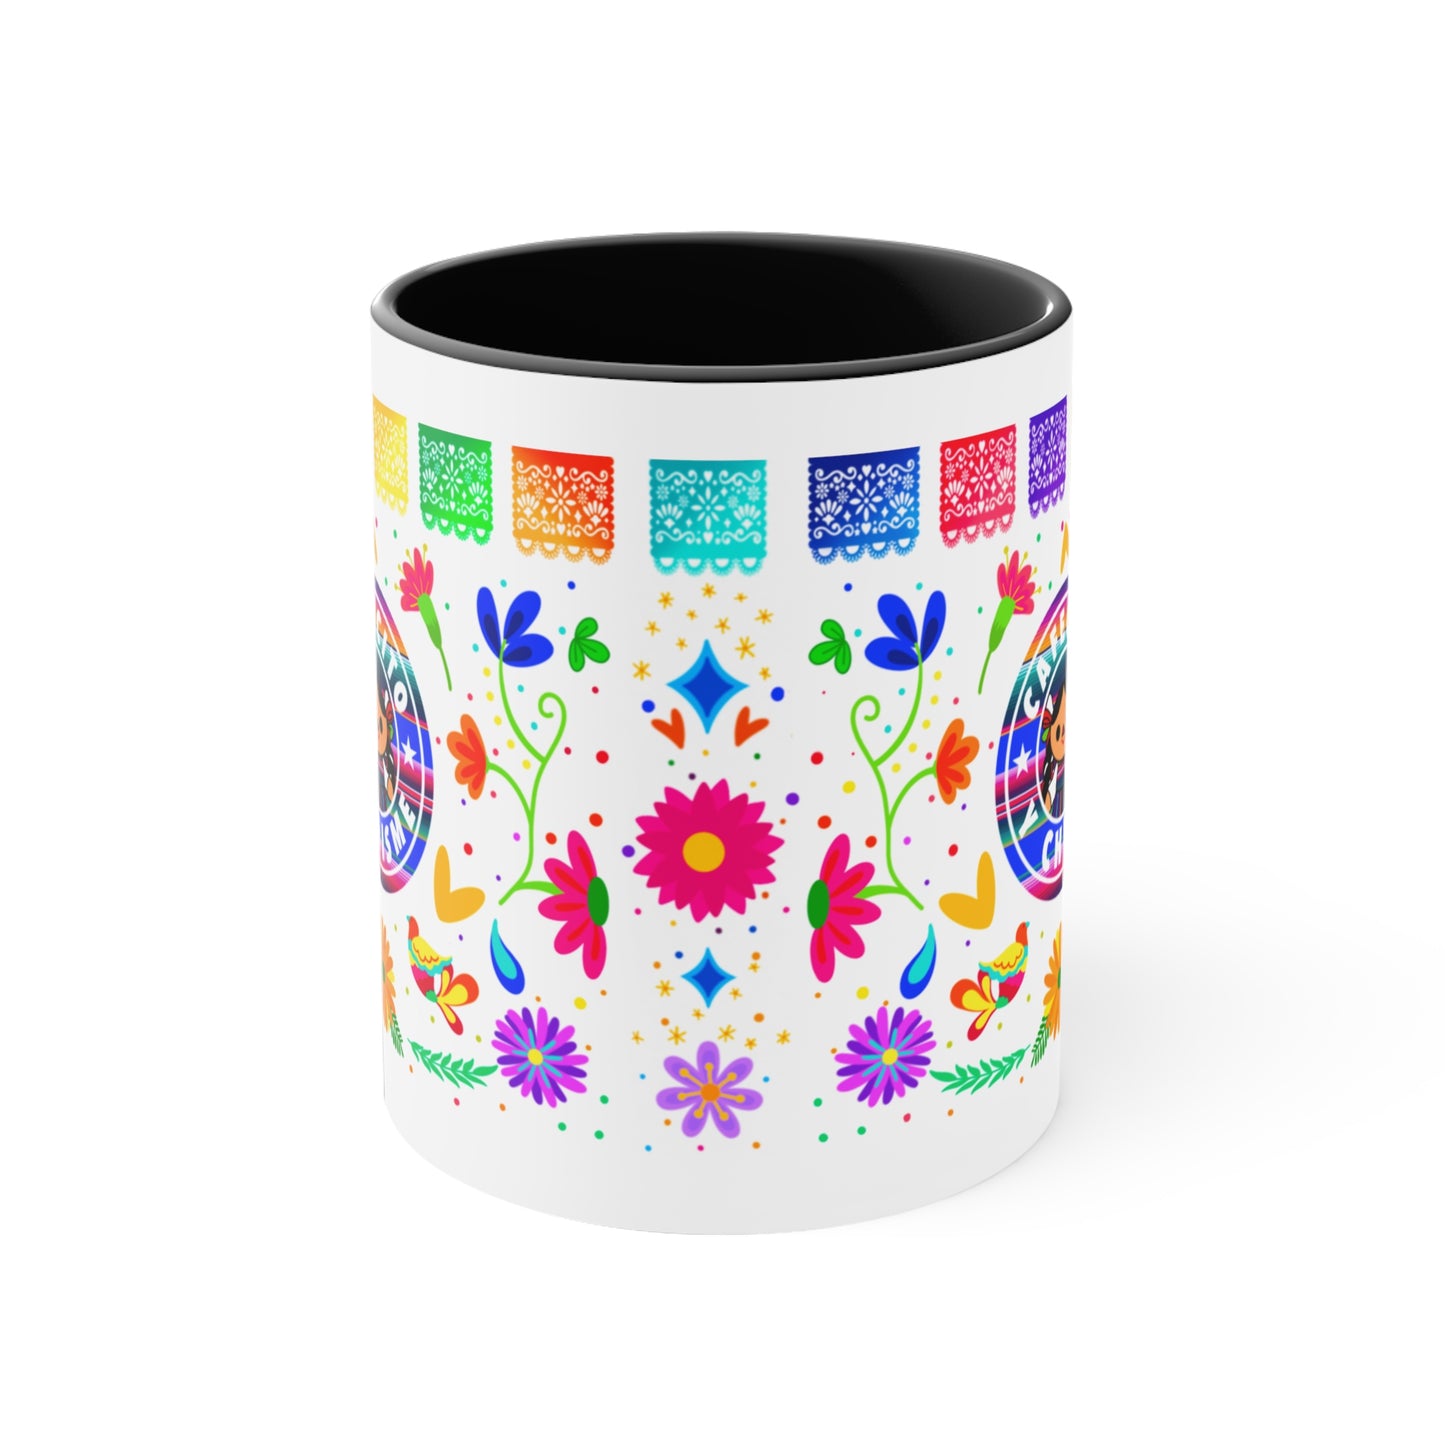 Cafecito y chisme Coffee Mug, 11oz. Mexican mug for her. Mexican gift ideas for woman. Café y chisme